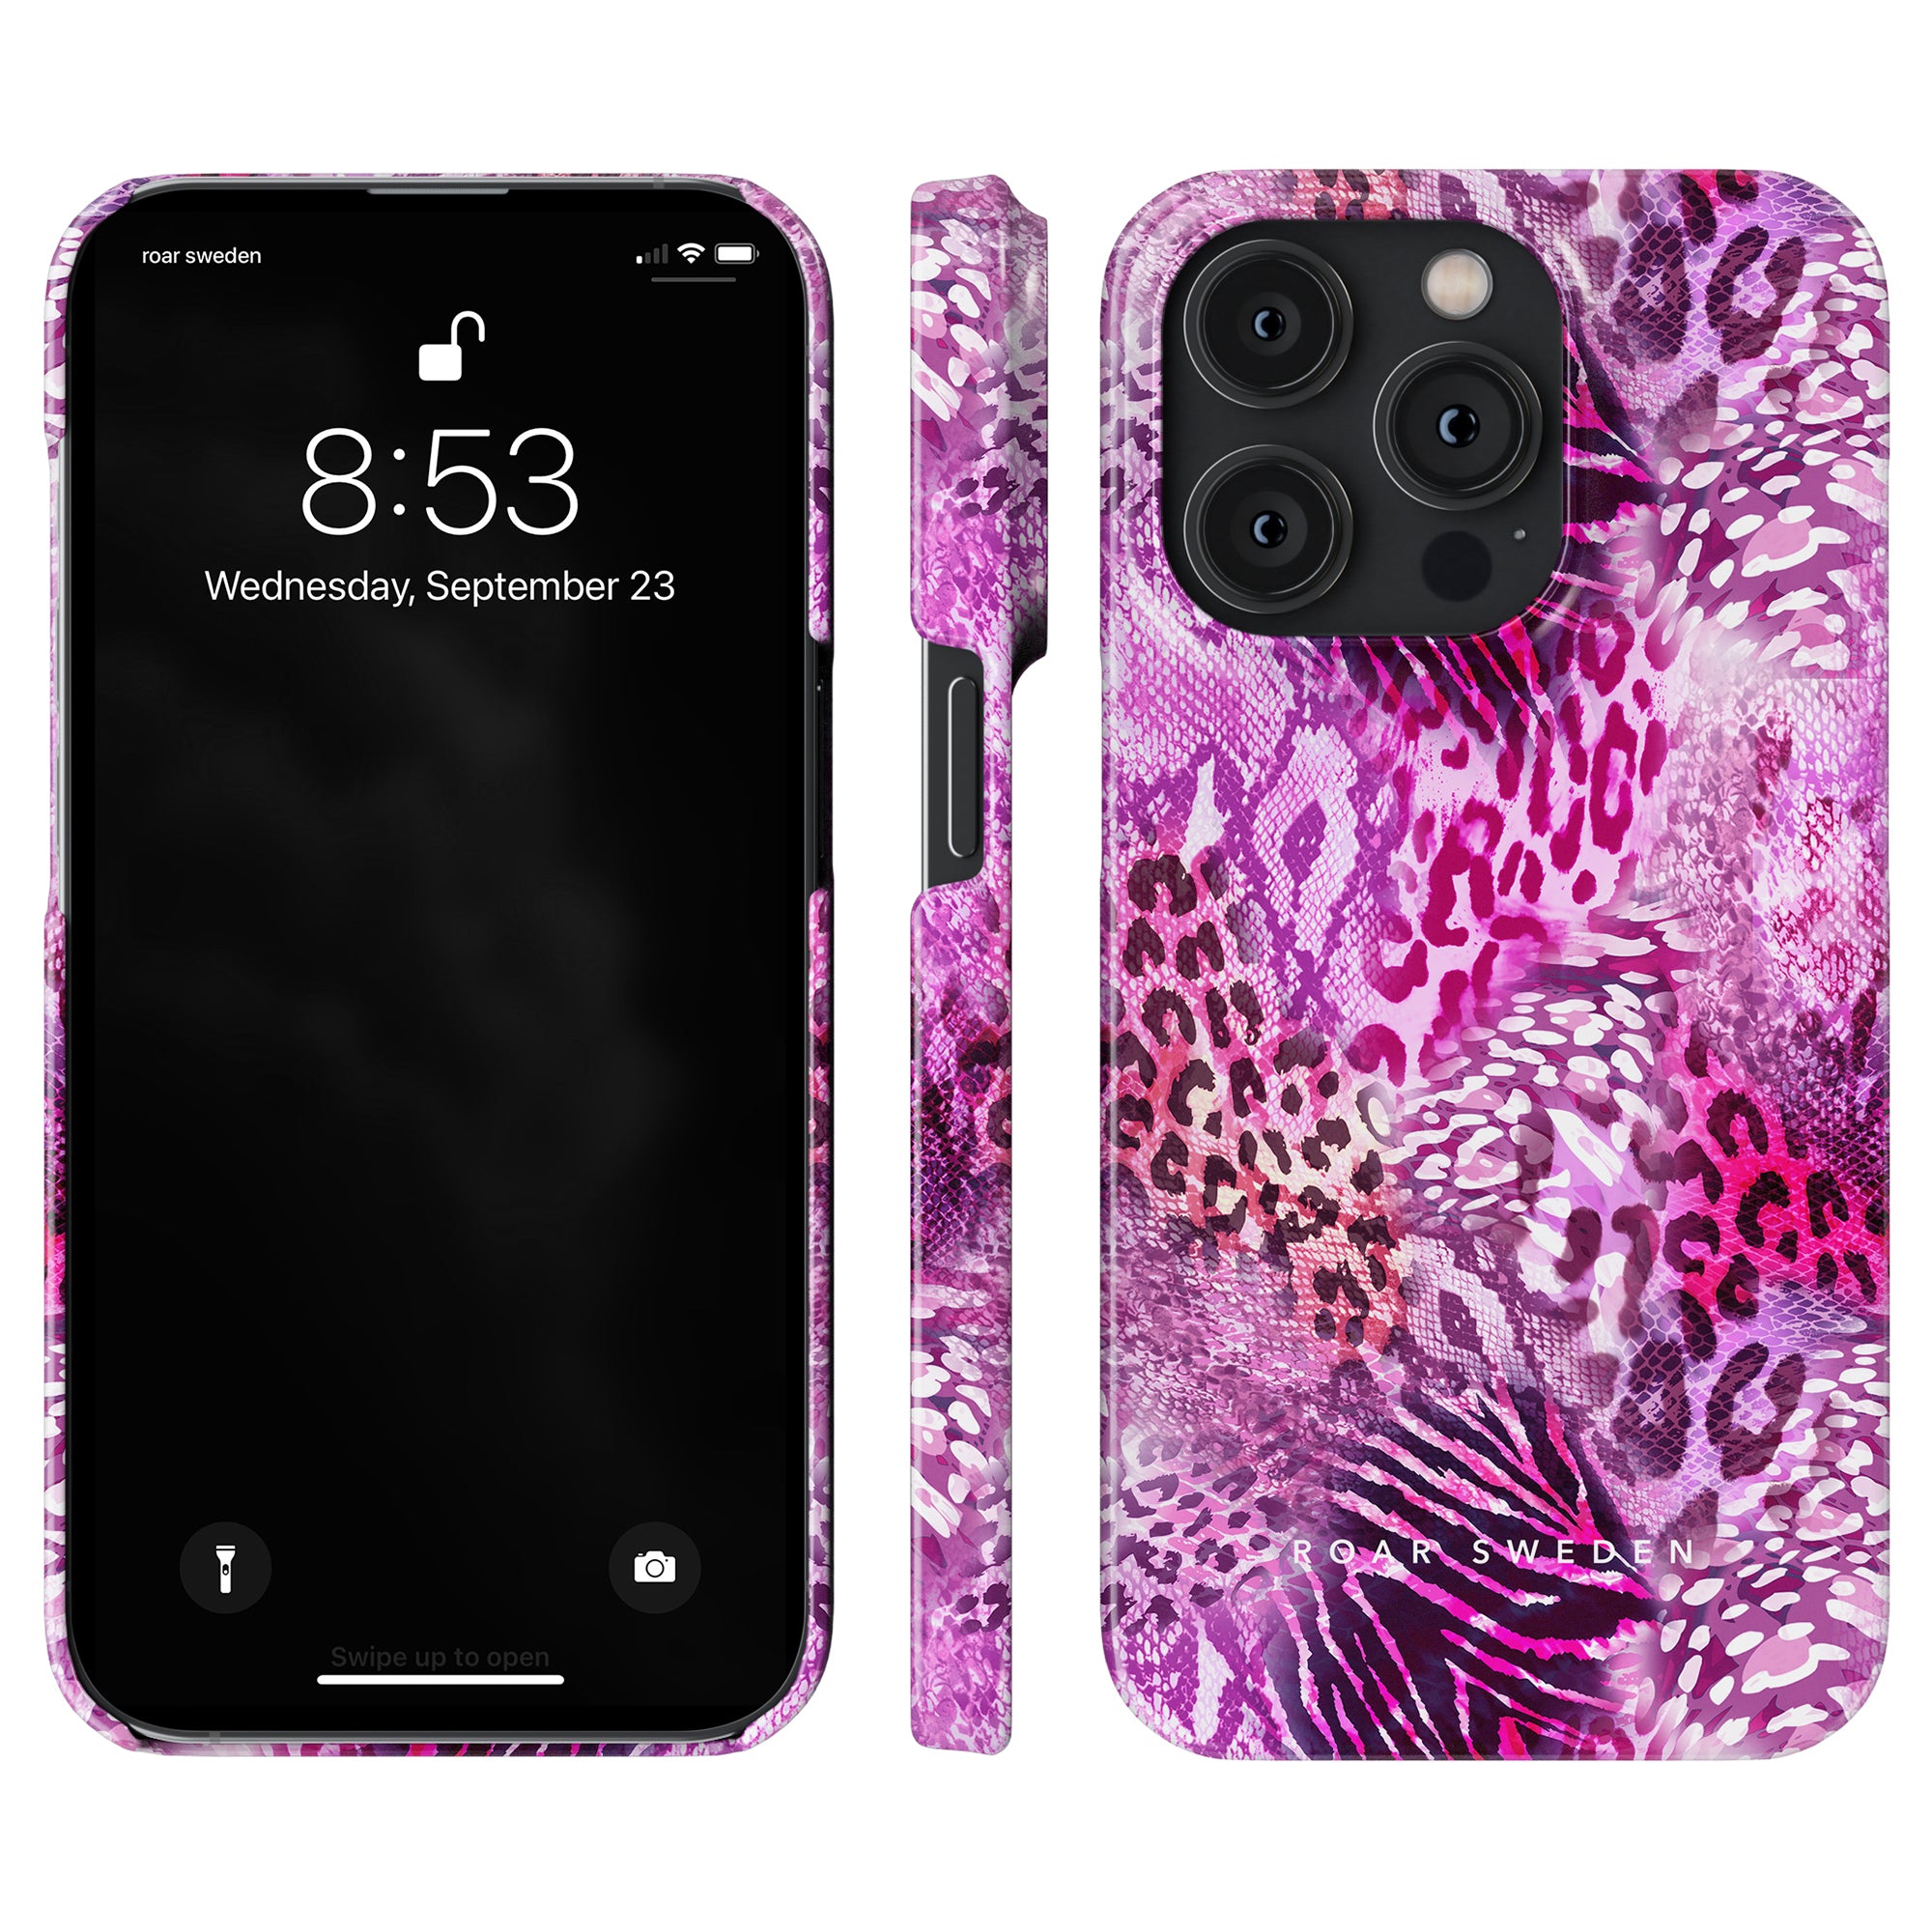 A Swirl Leopard - Slim case for the iPhone 11 Pro.